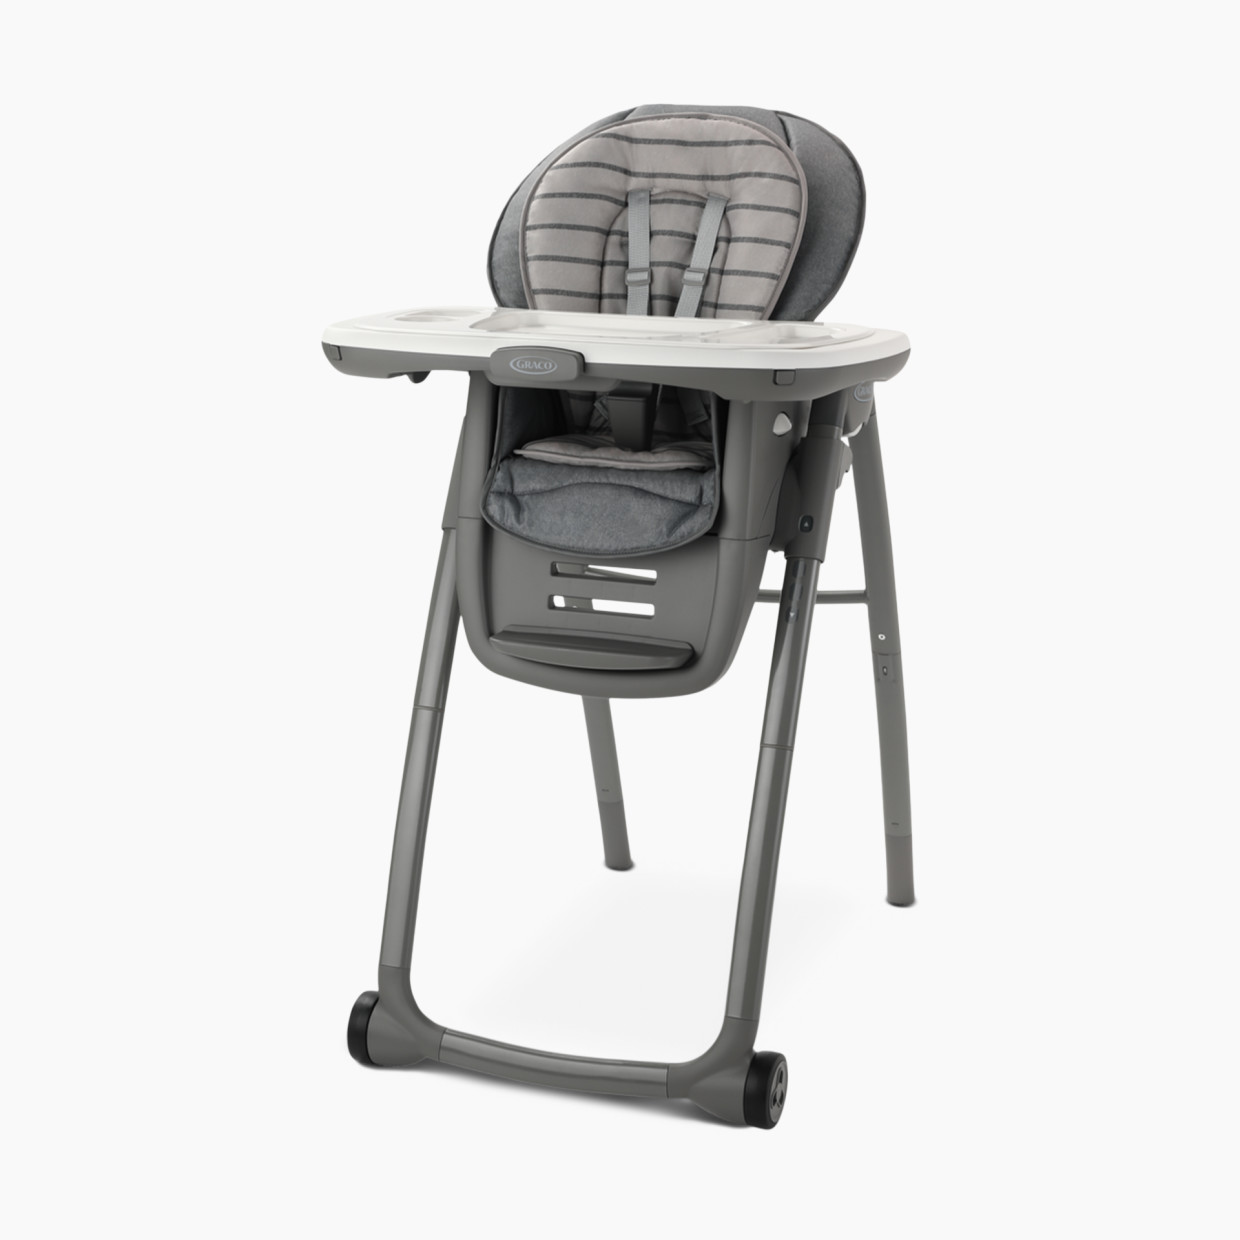 Graco Table2Table Premier Fold 7-in-1 High Chair - Maison.